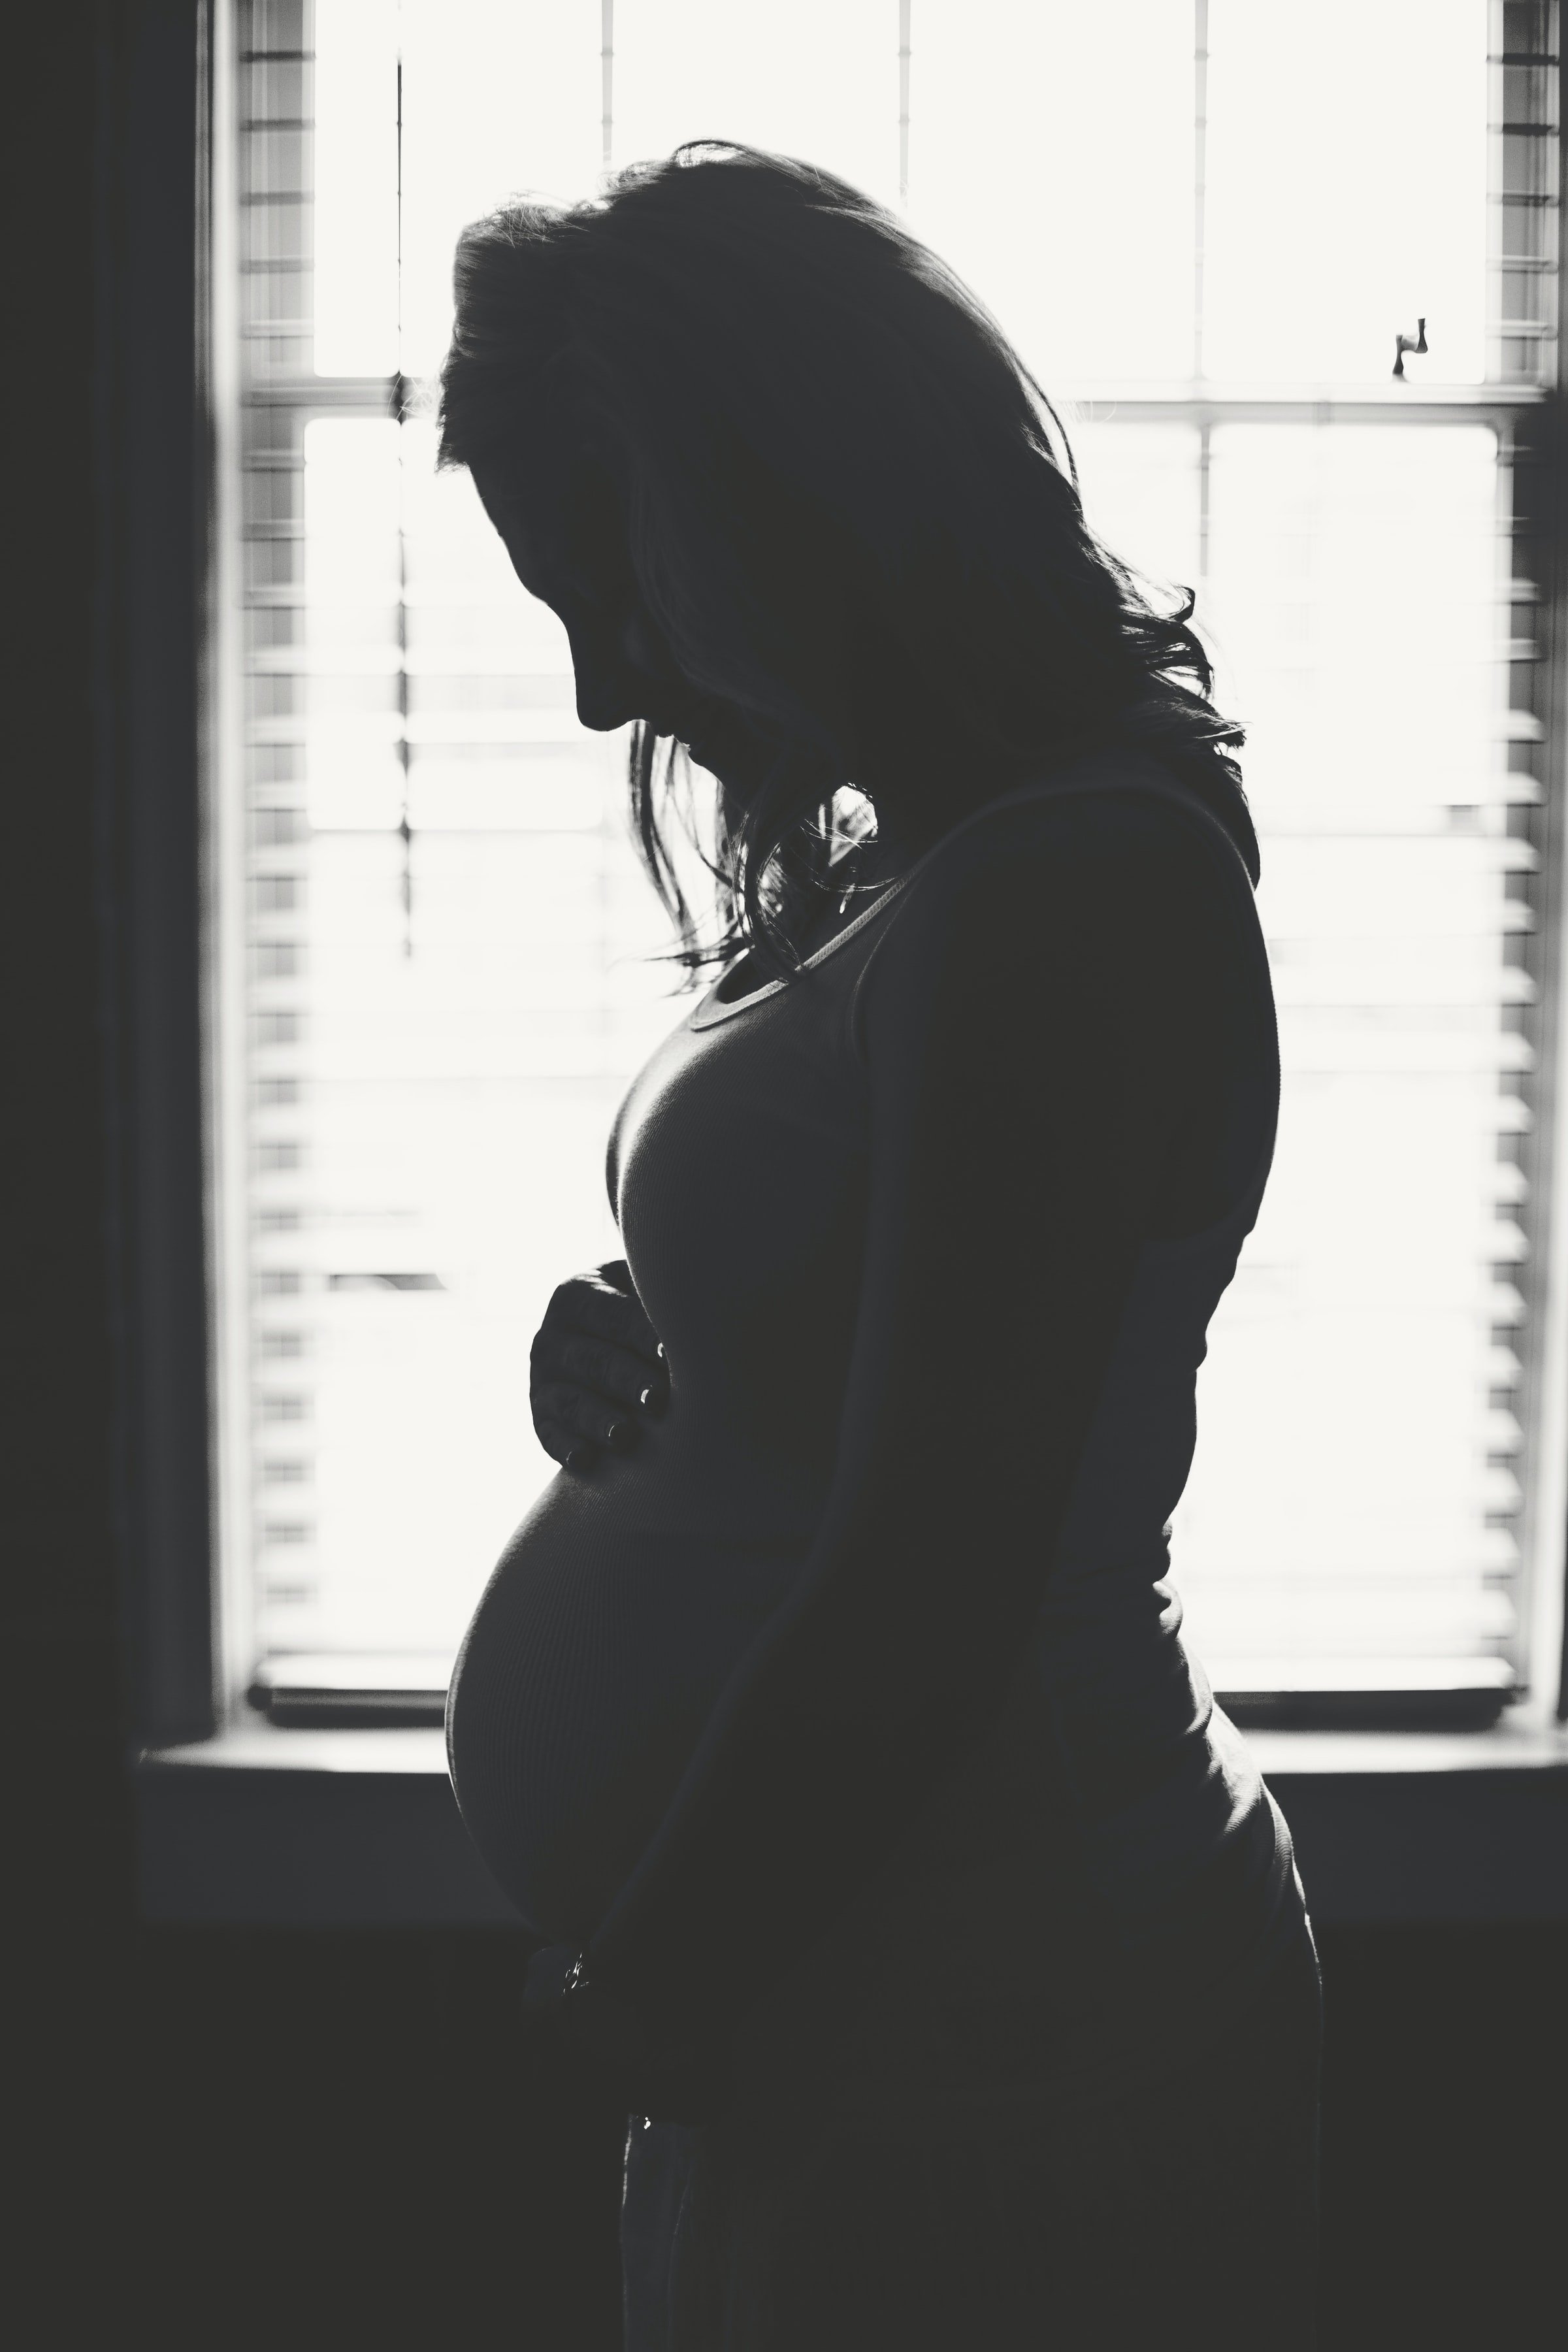 A grayscale photo of a pregnant woman. | Source: Unsplash